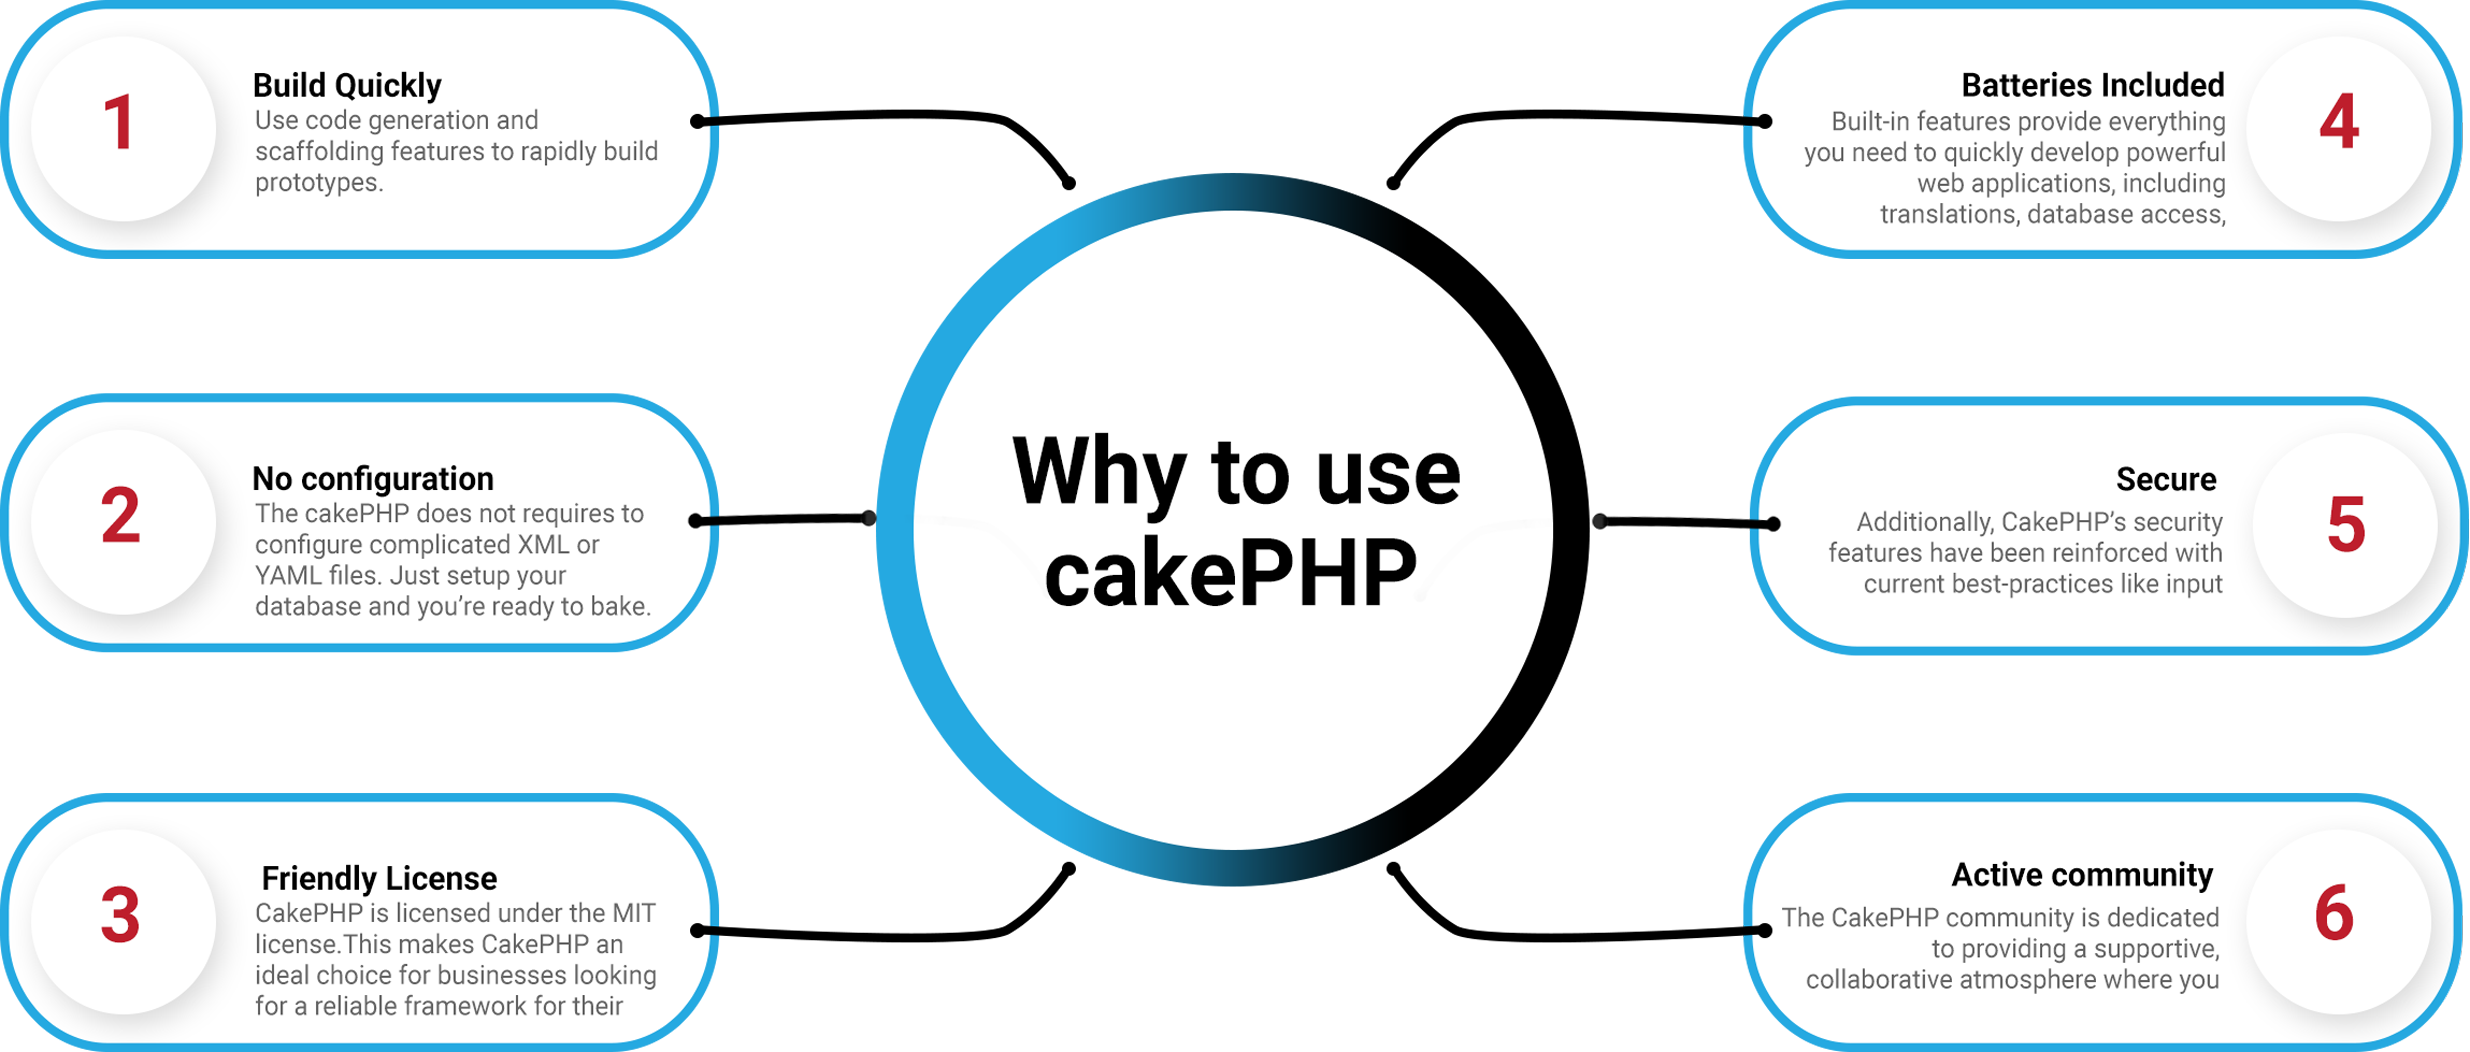 why we use CakePHP